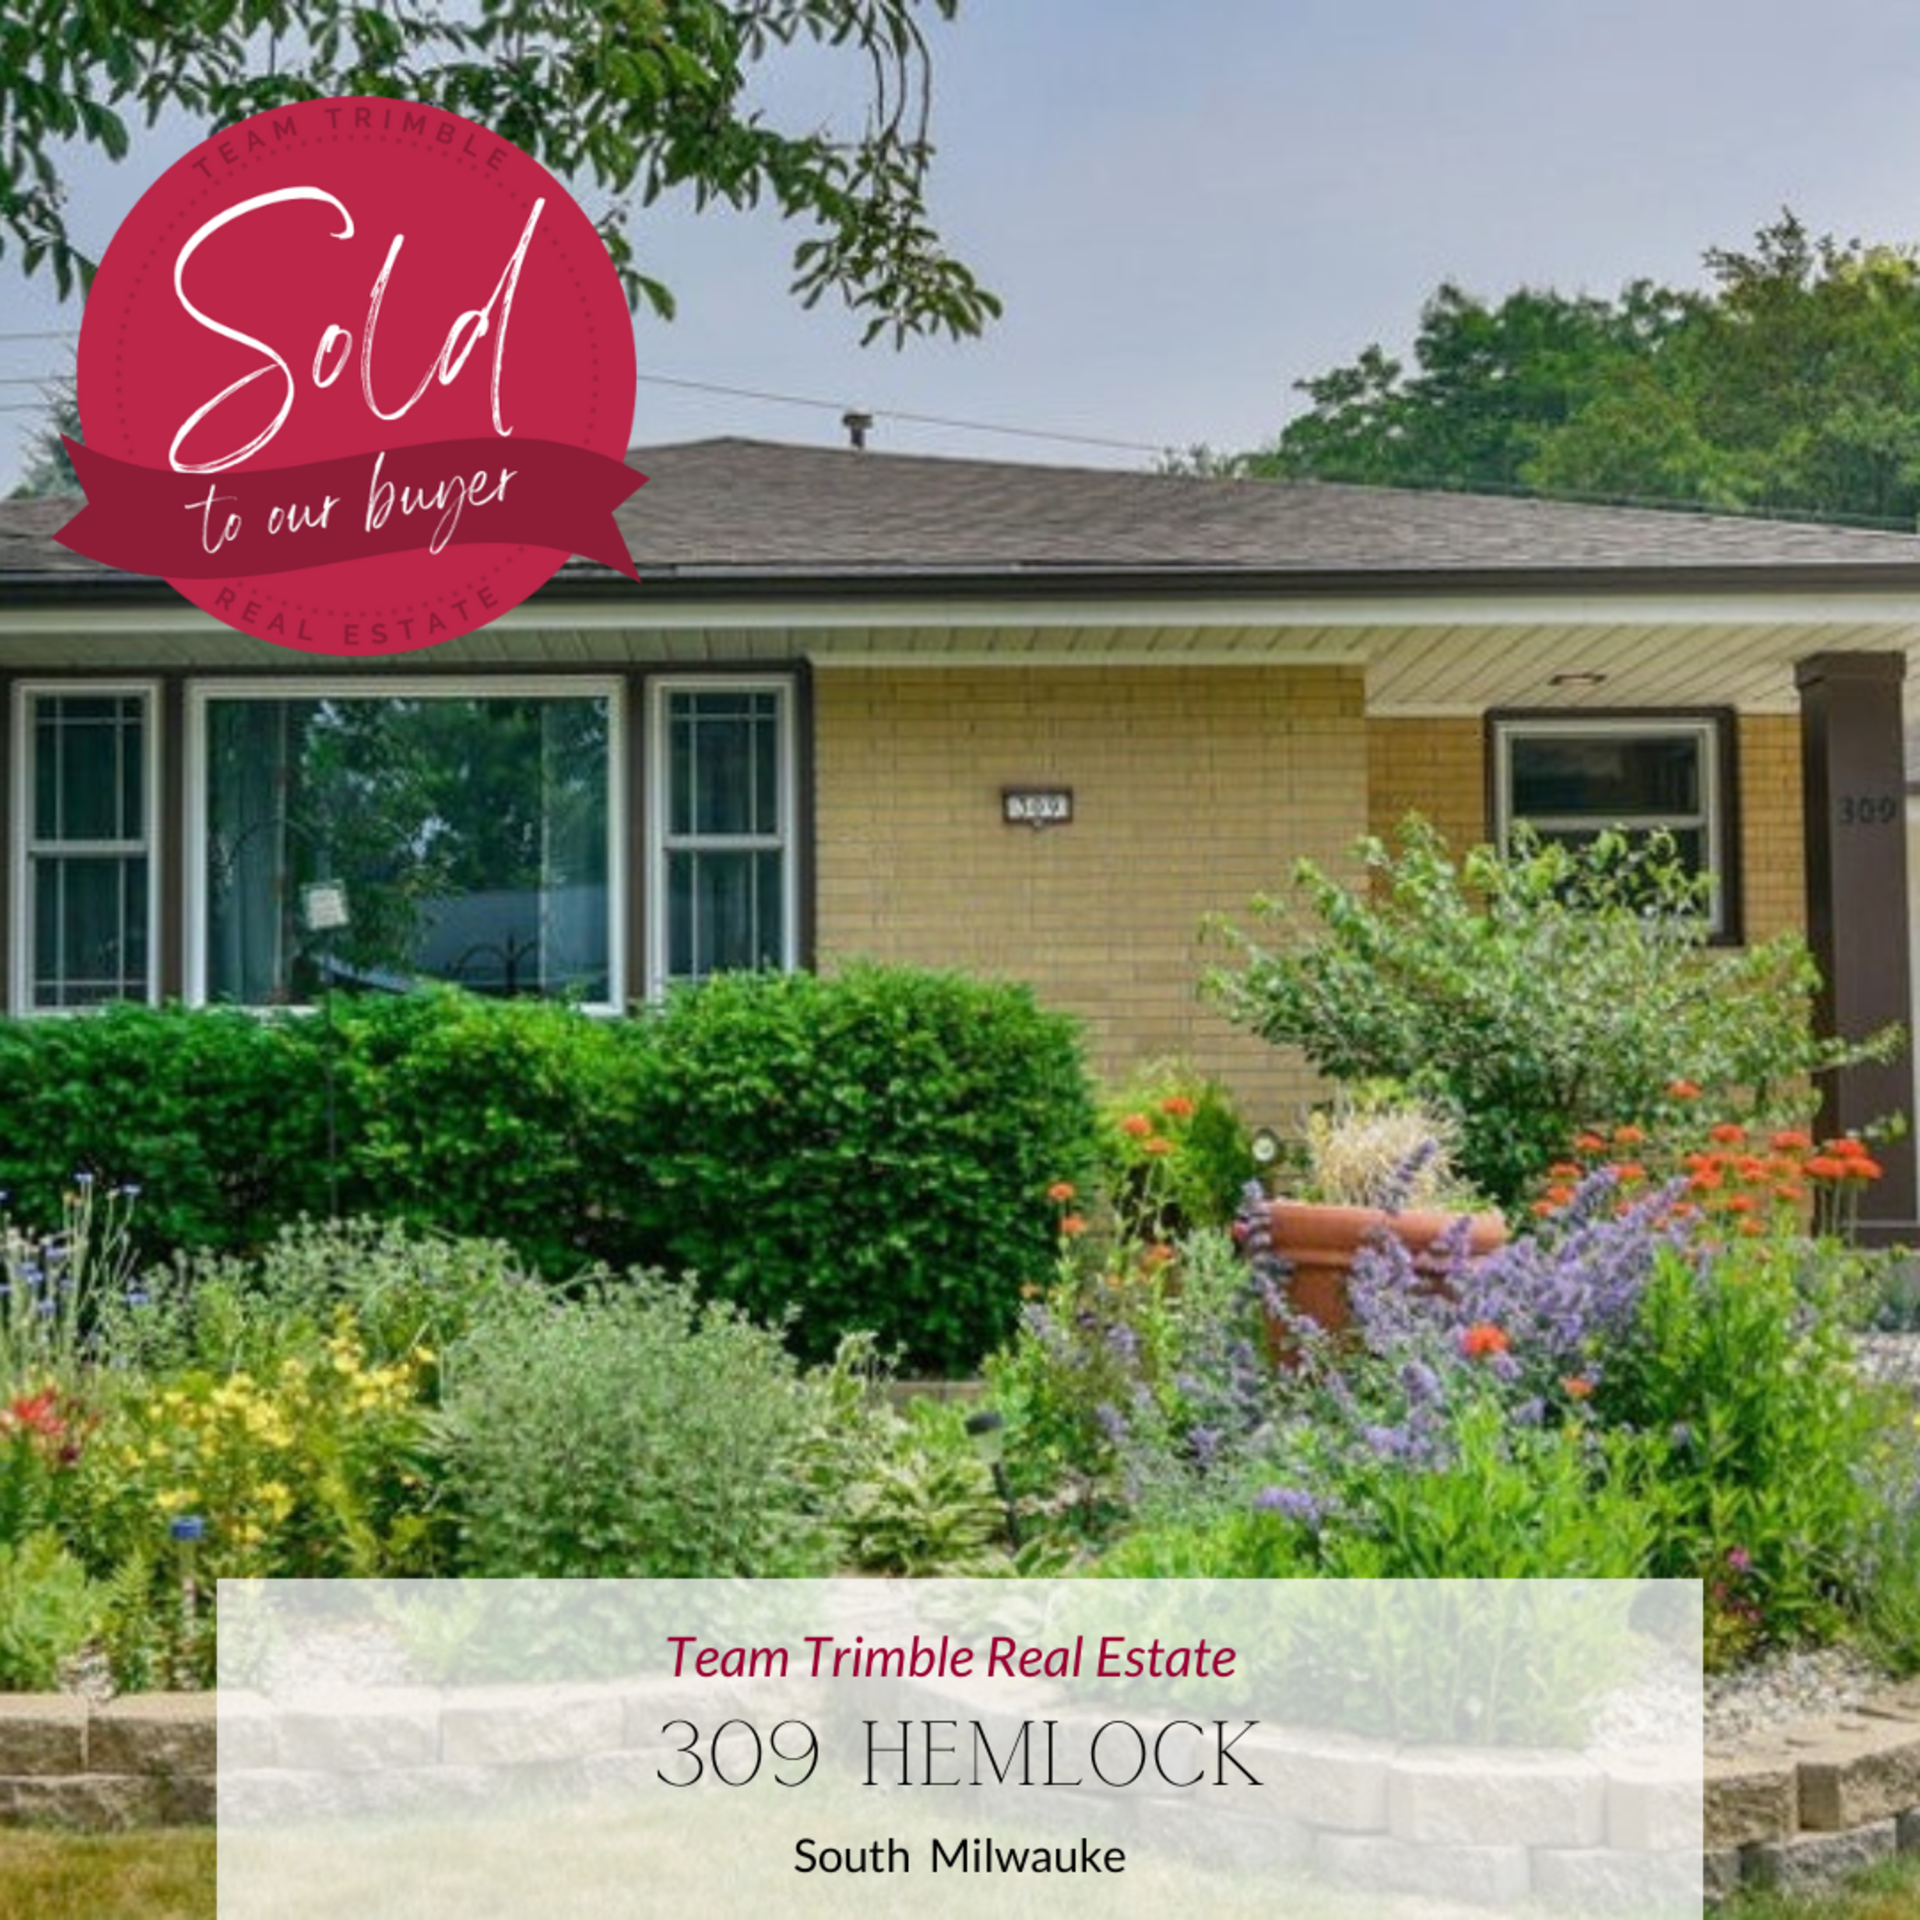 Sold to our buyer. 309 Hemlock Ct, South Milwaukee, WI 53172